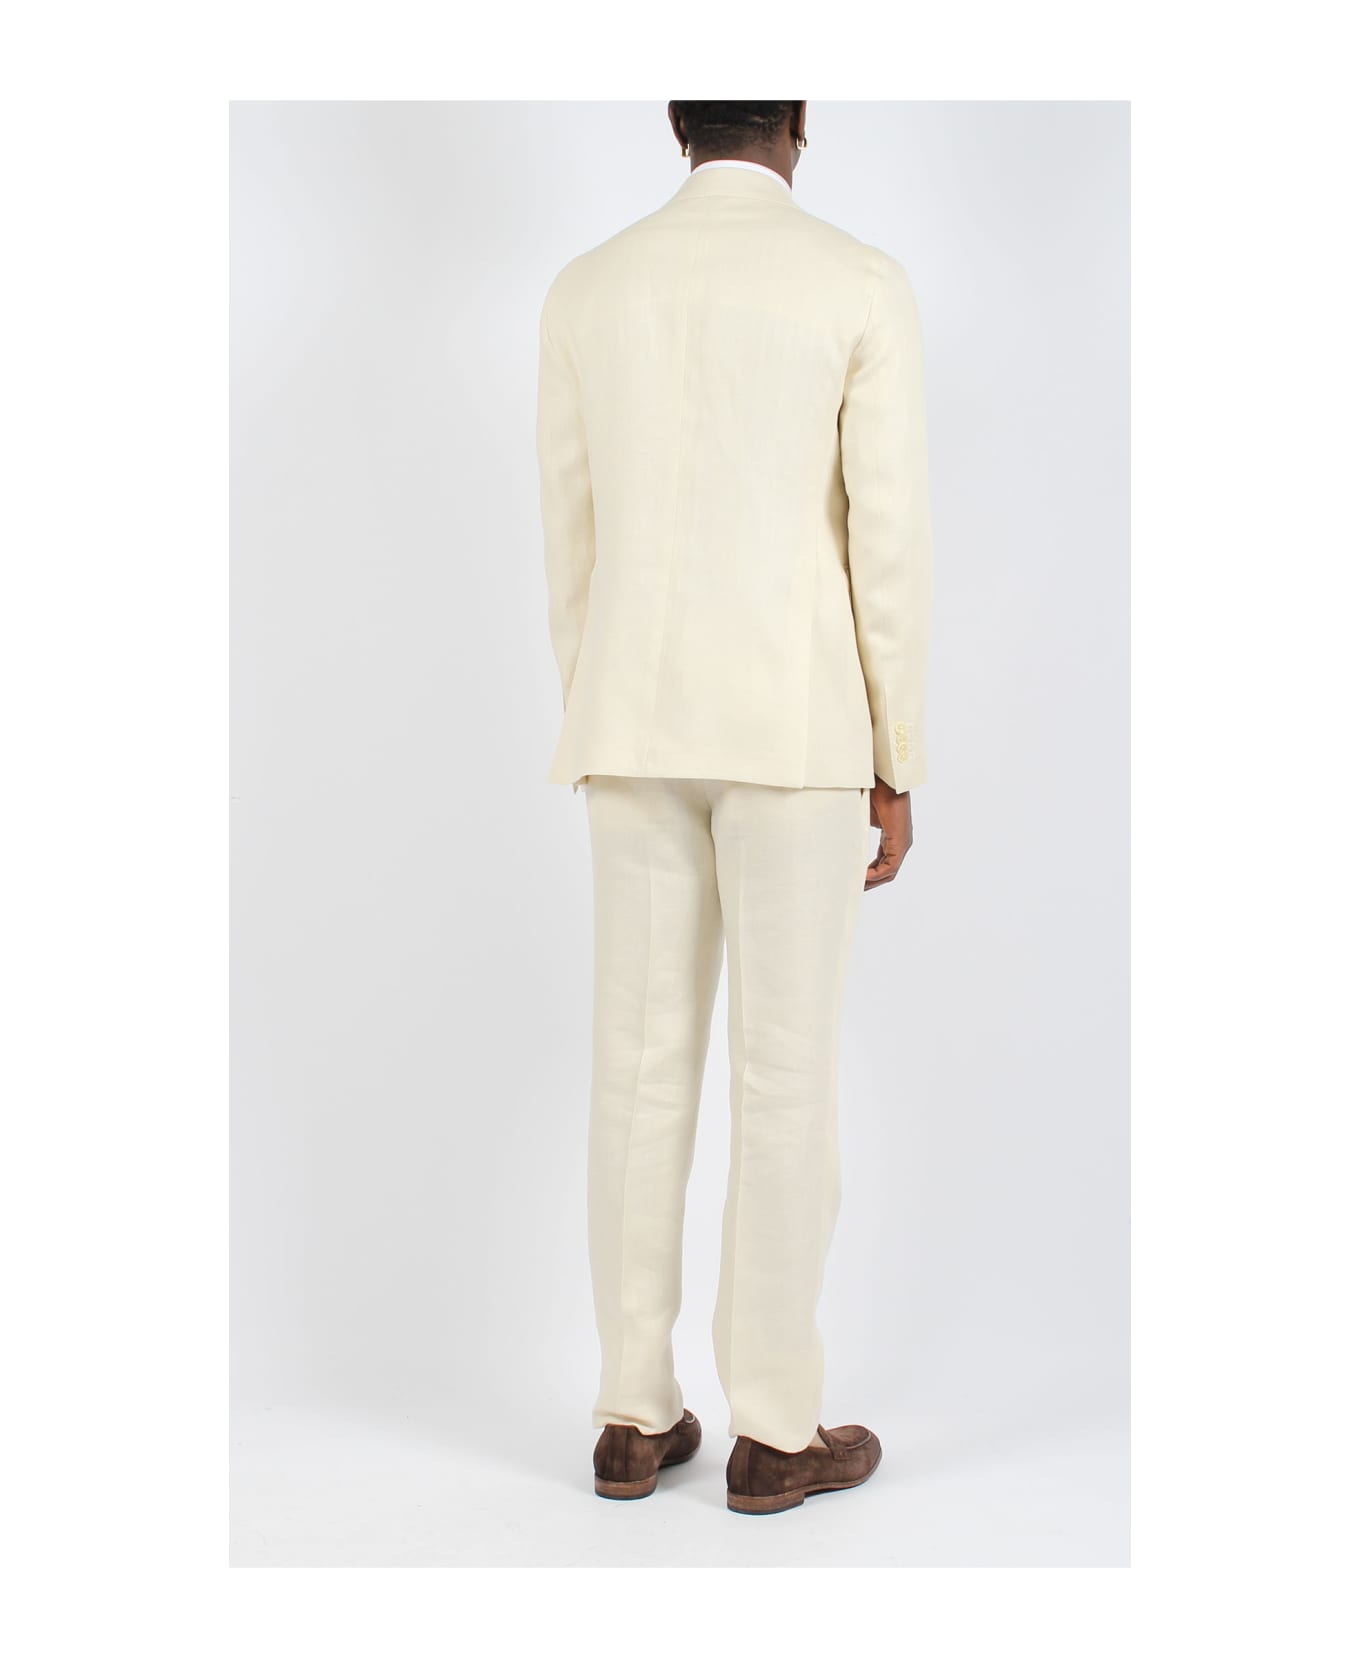 Tagliatore Linen Double-breasted Tailored Suit - White スーツ